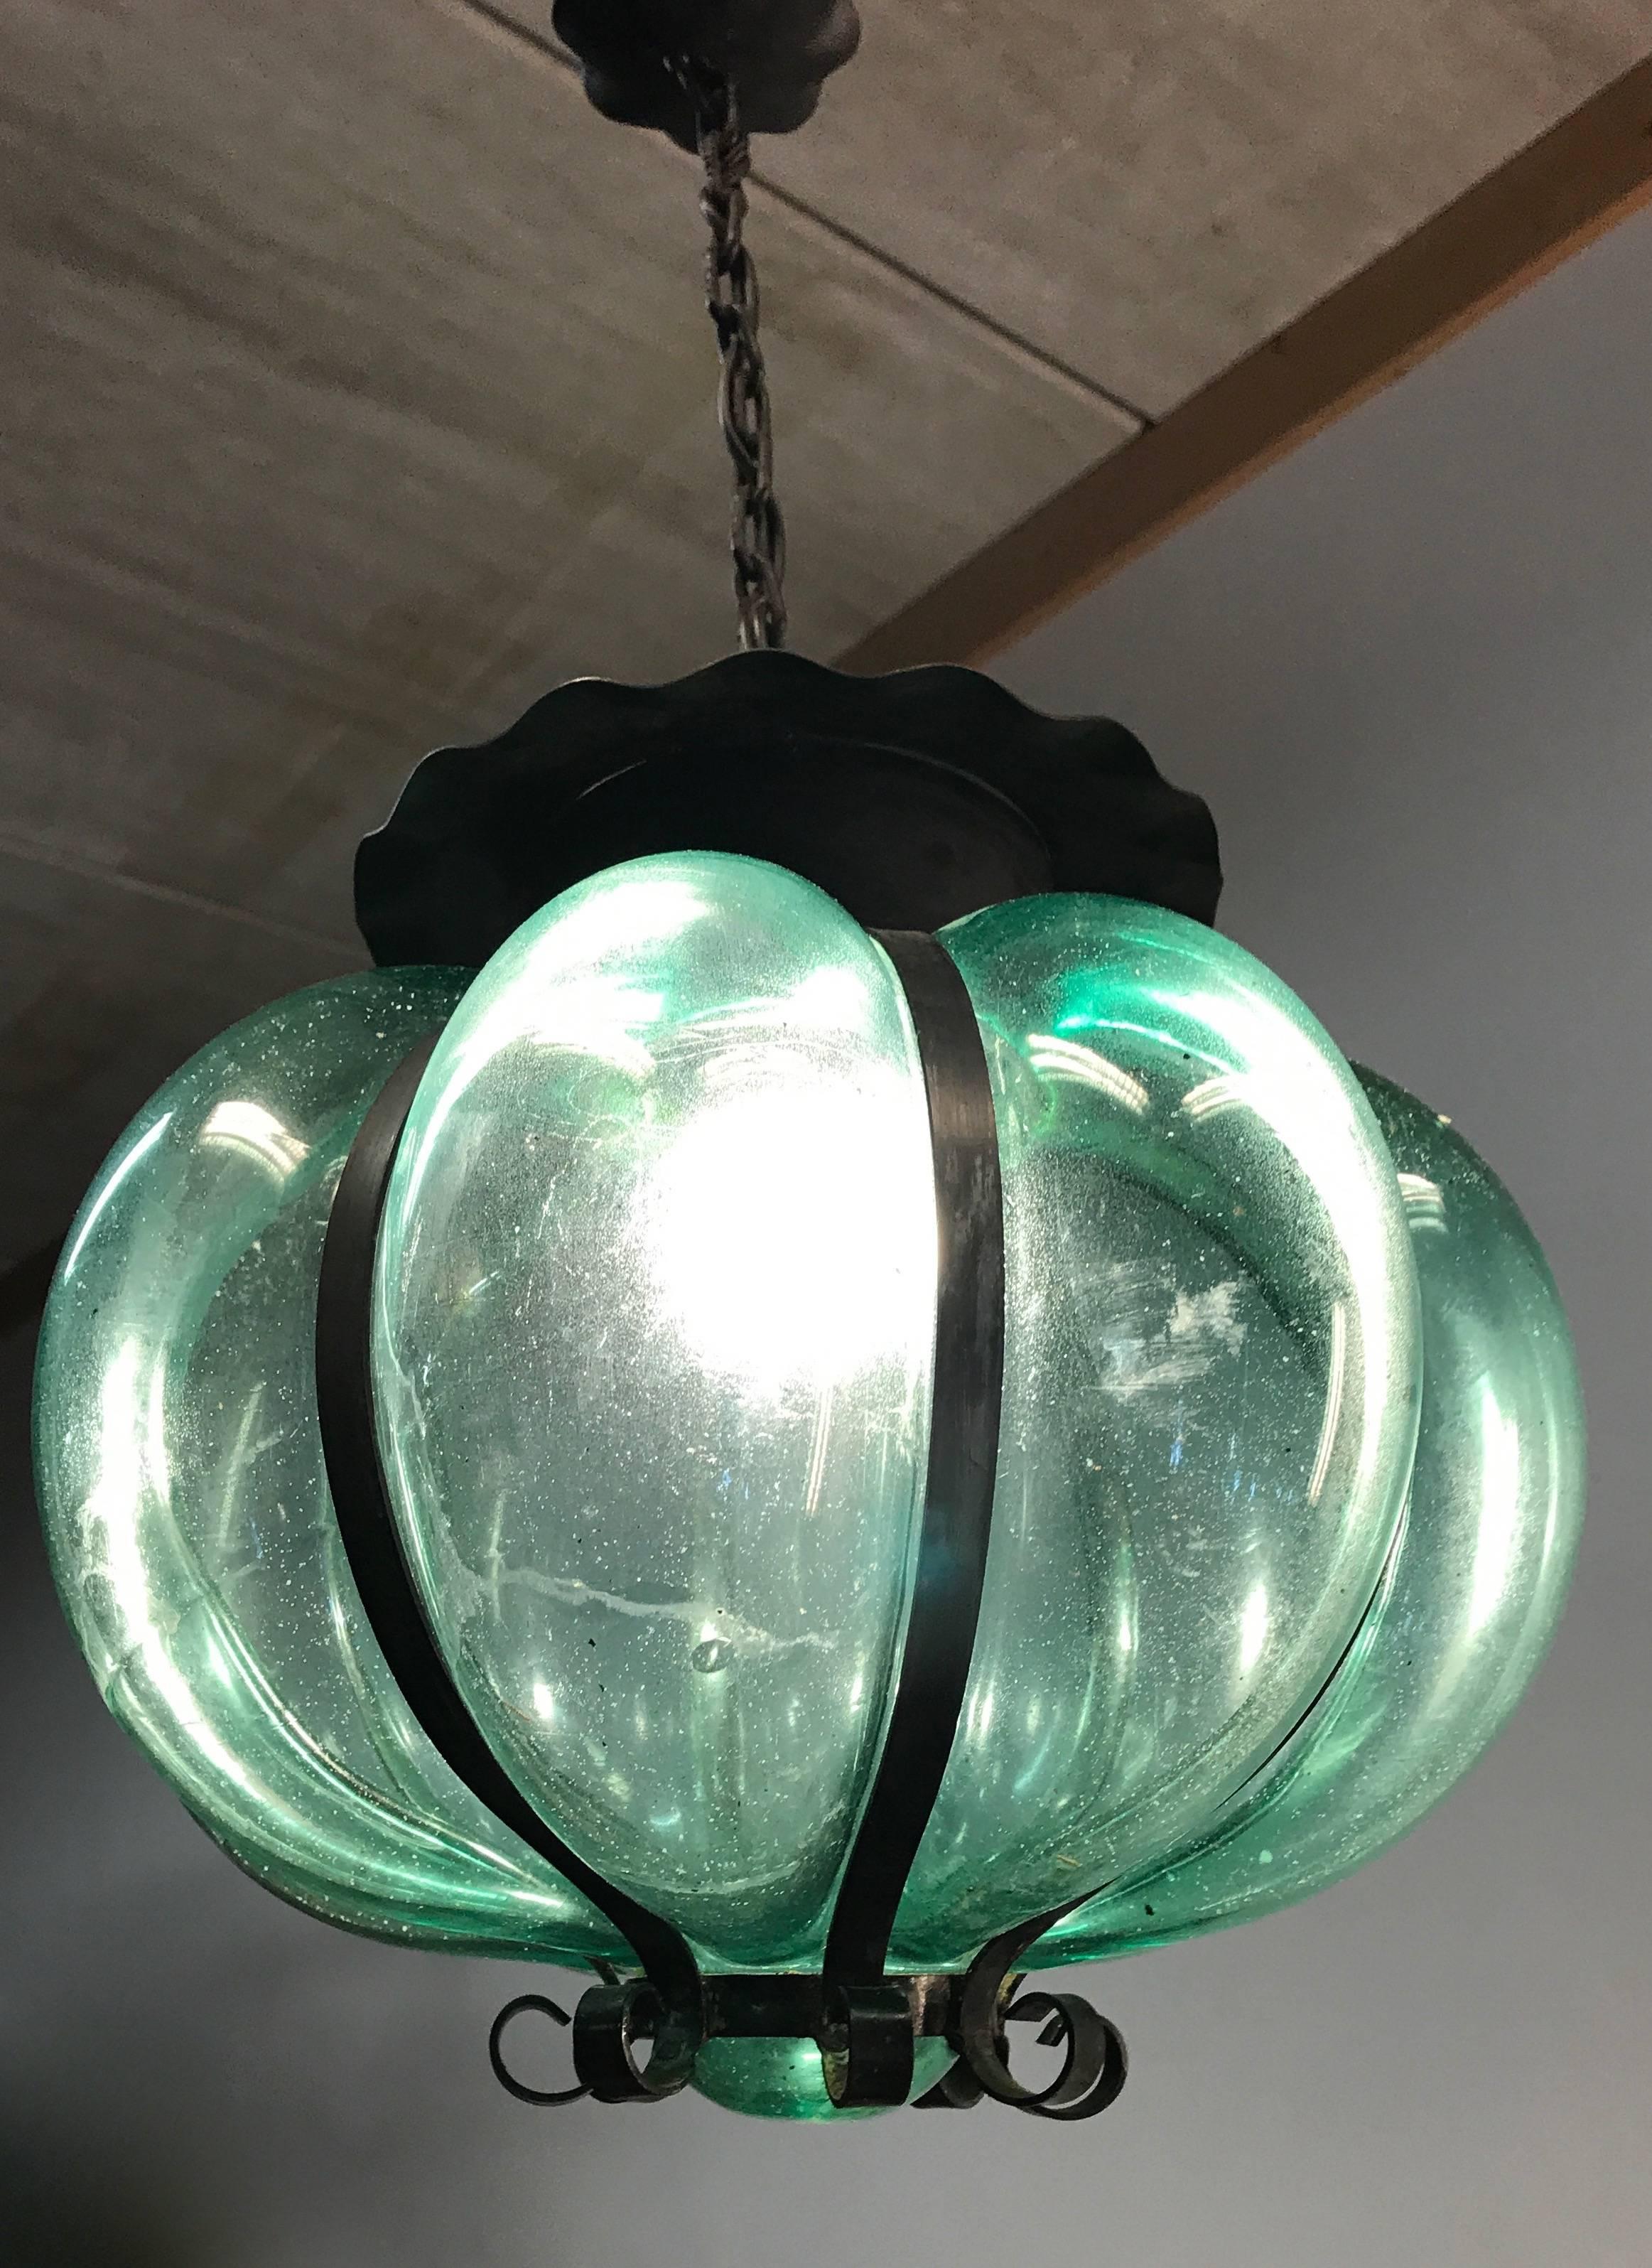 Hand-Crafted Vintage Mouth Blown Thick Glass Venetian Style Pendant Light Ceiling Fixture